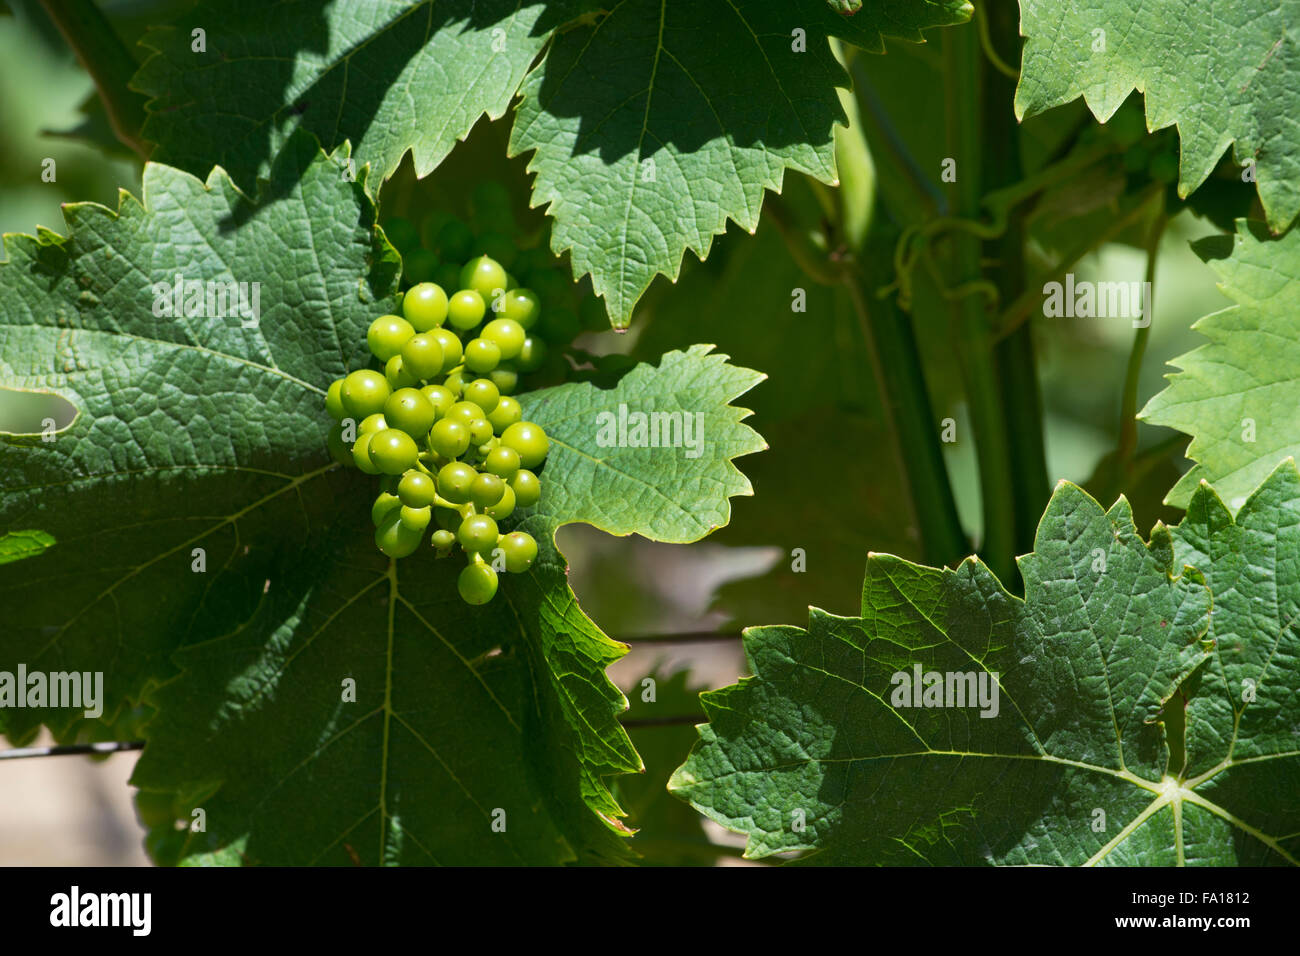 South Africa, Cape Town. Groot Constantia Winery (Landgoed Estate), historic winery est. 1685. New unripe grapes on the vine. Stock Photo